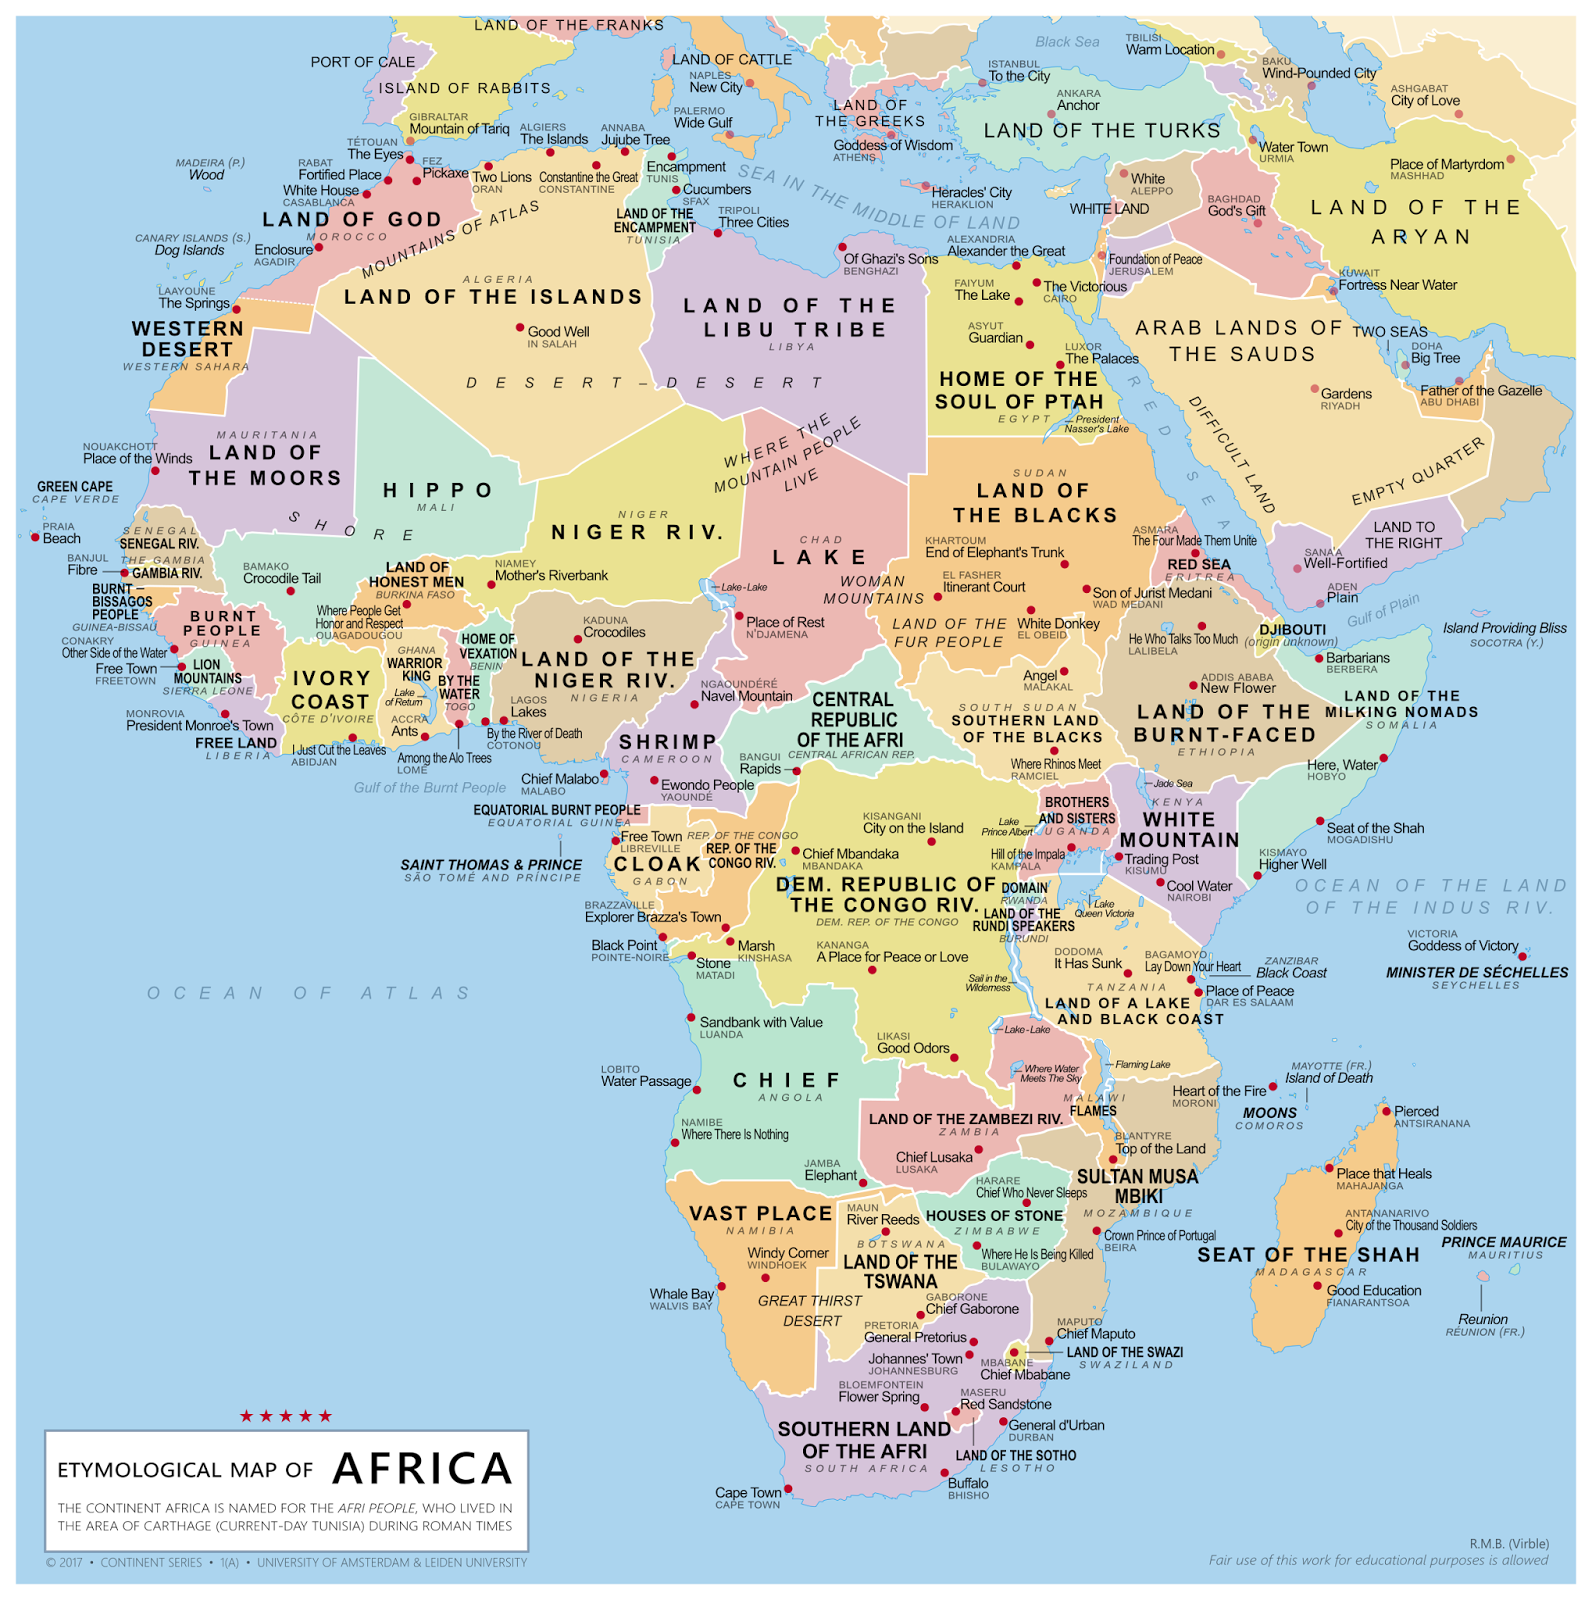 Etymological Map of Africa - Vivid Maps